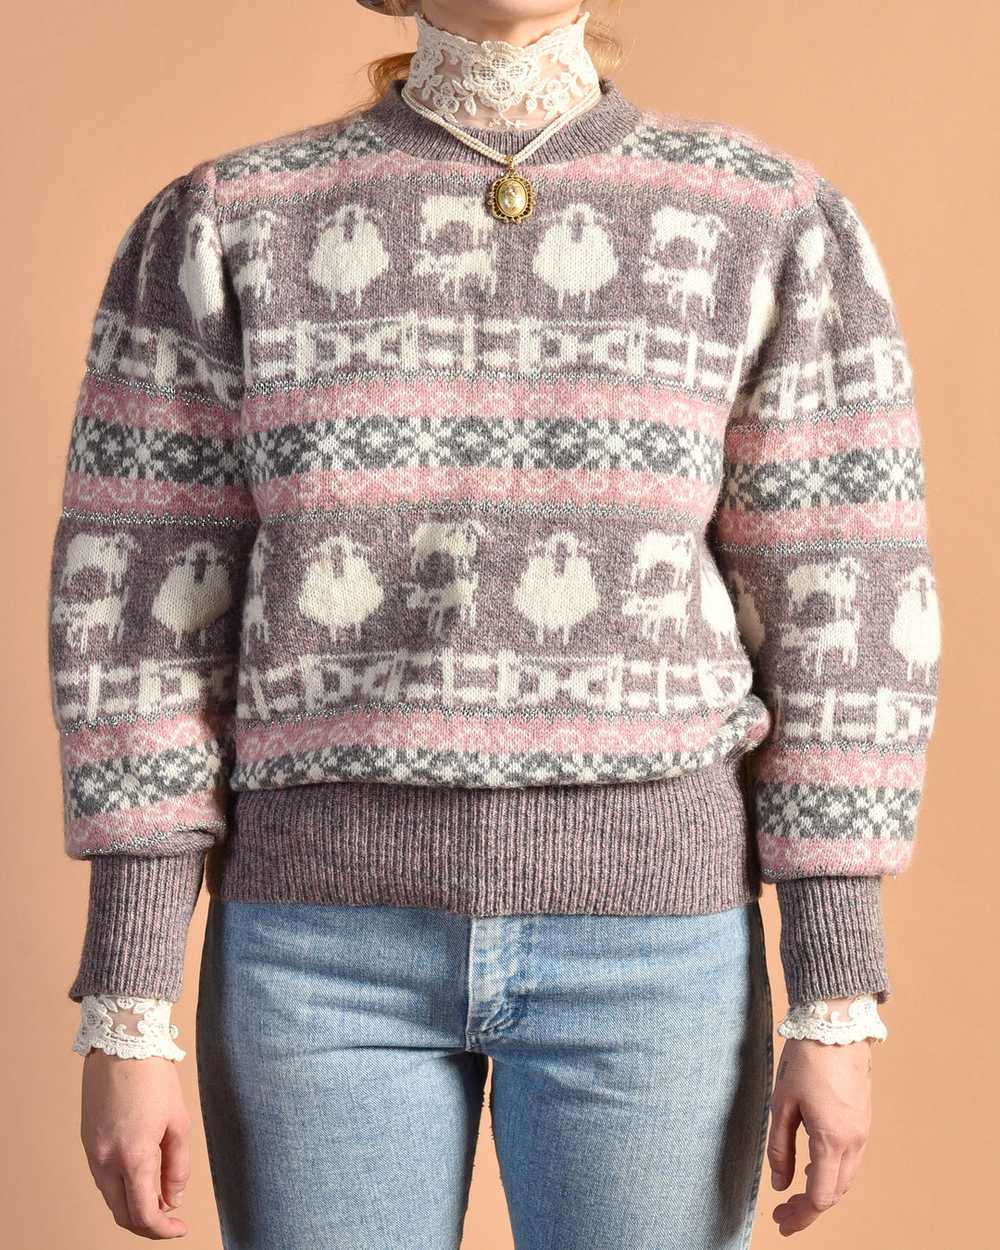 Dorian 1980s Sparkly Wool Sheep Sweater - image 1